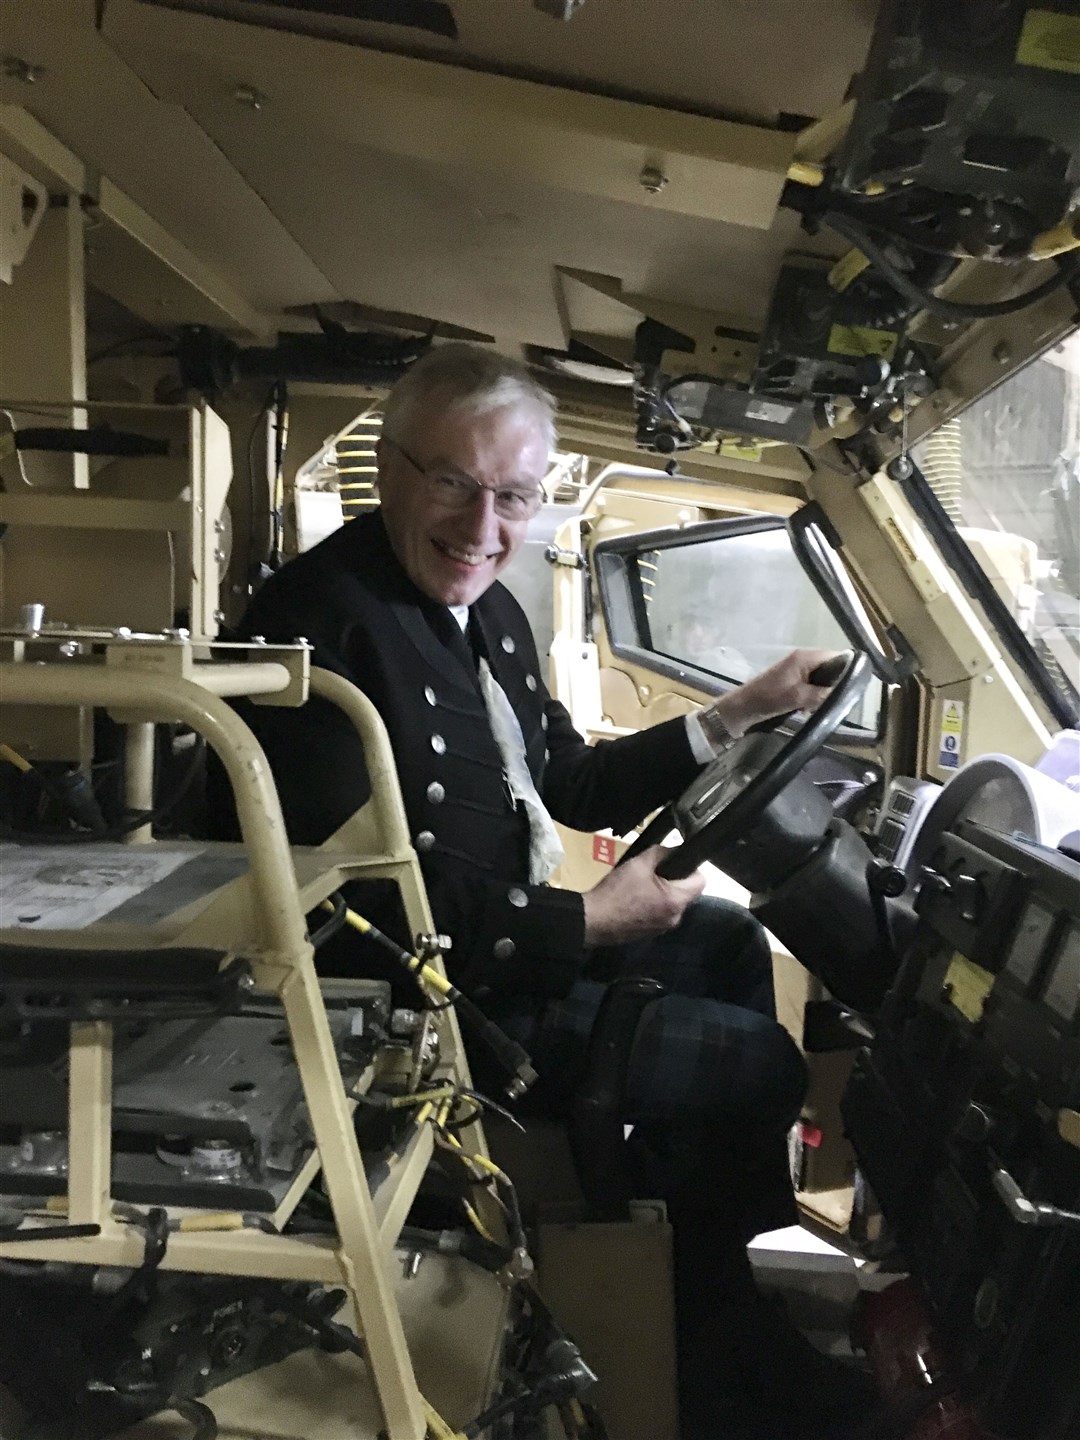 The Rt Rev Colin Sinclair gets behind the wheel of a military vehicle during a visit to Kinloss Barraacks.